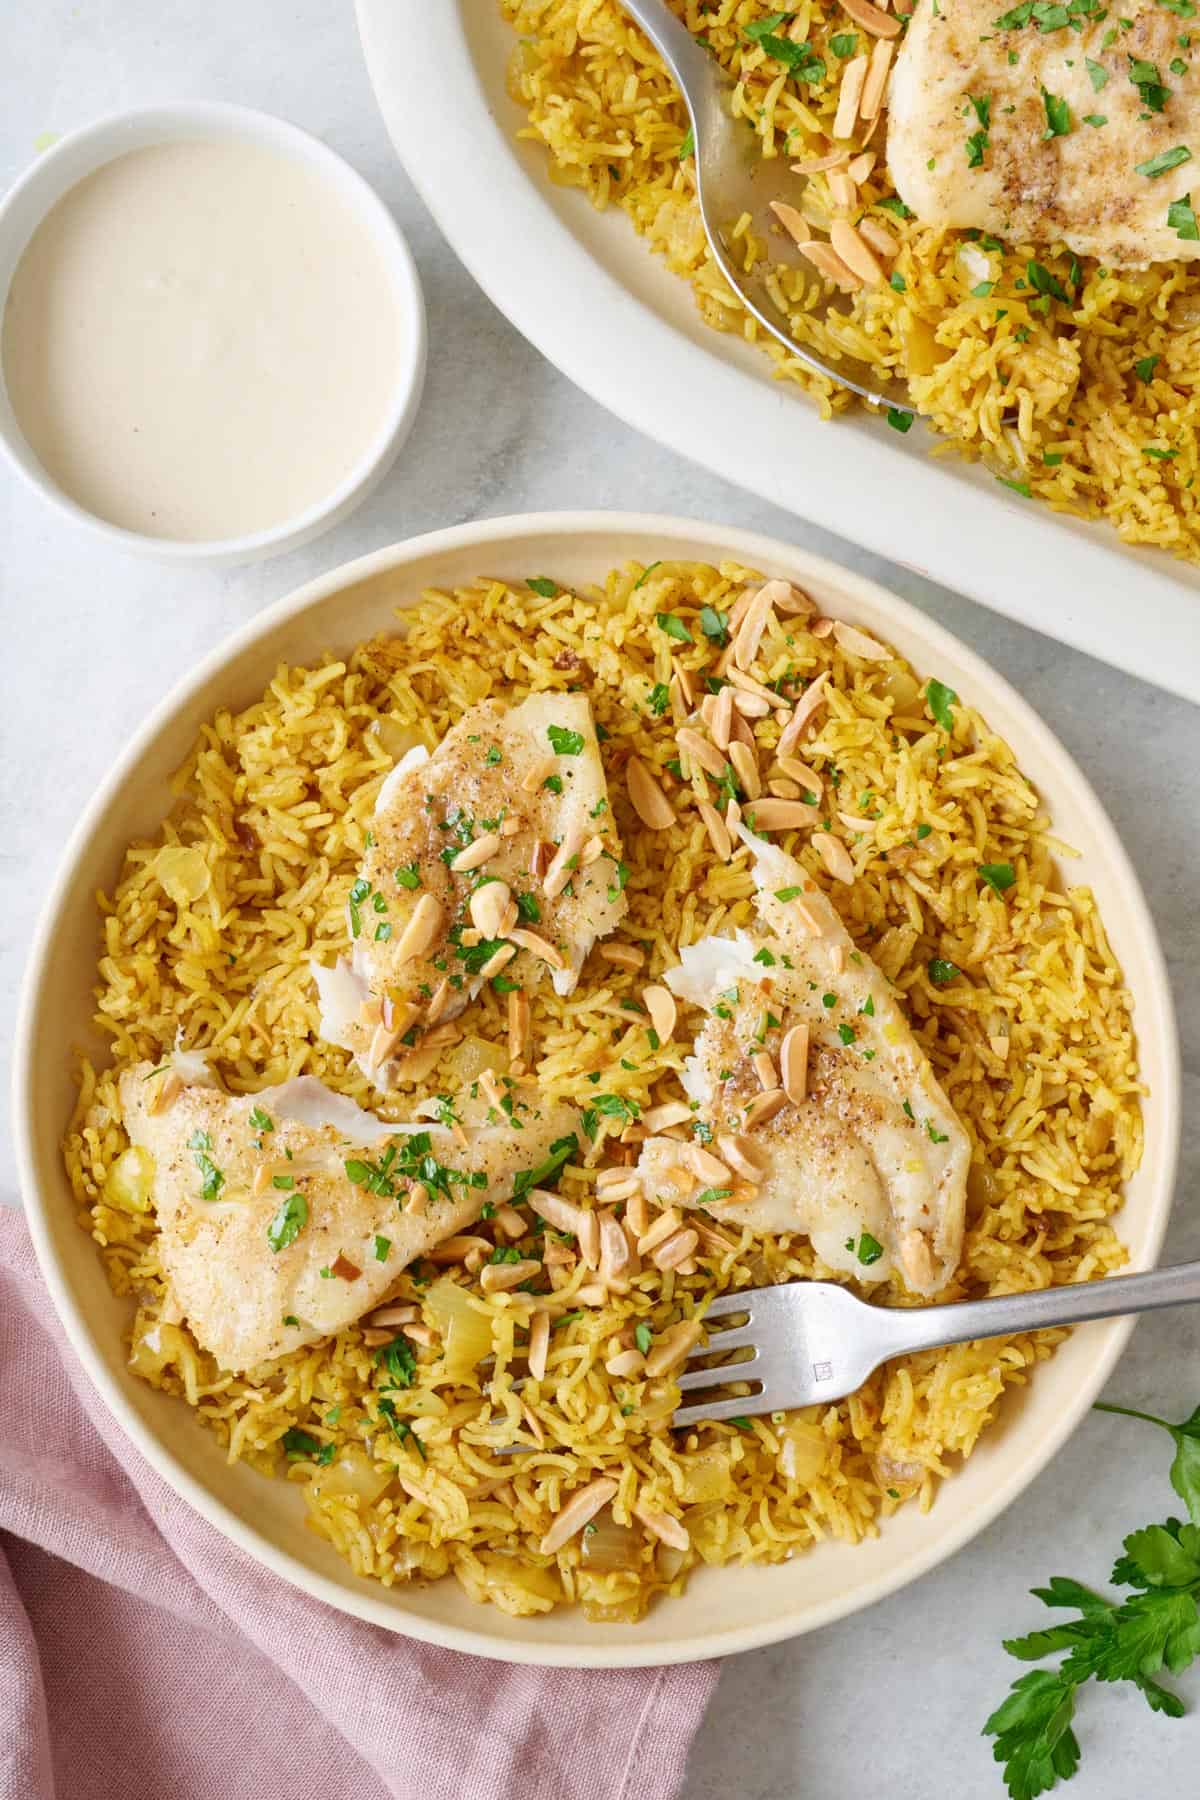 Lebanese rice and fish, or Sayadieh, on a plate with a side of tahini dressing.